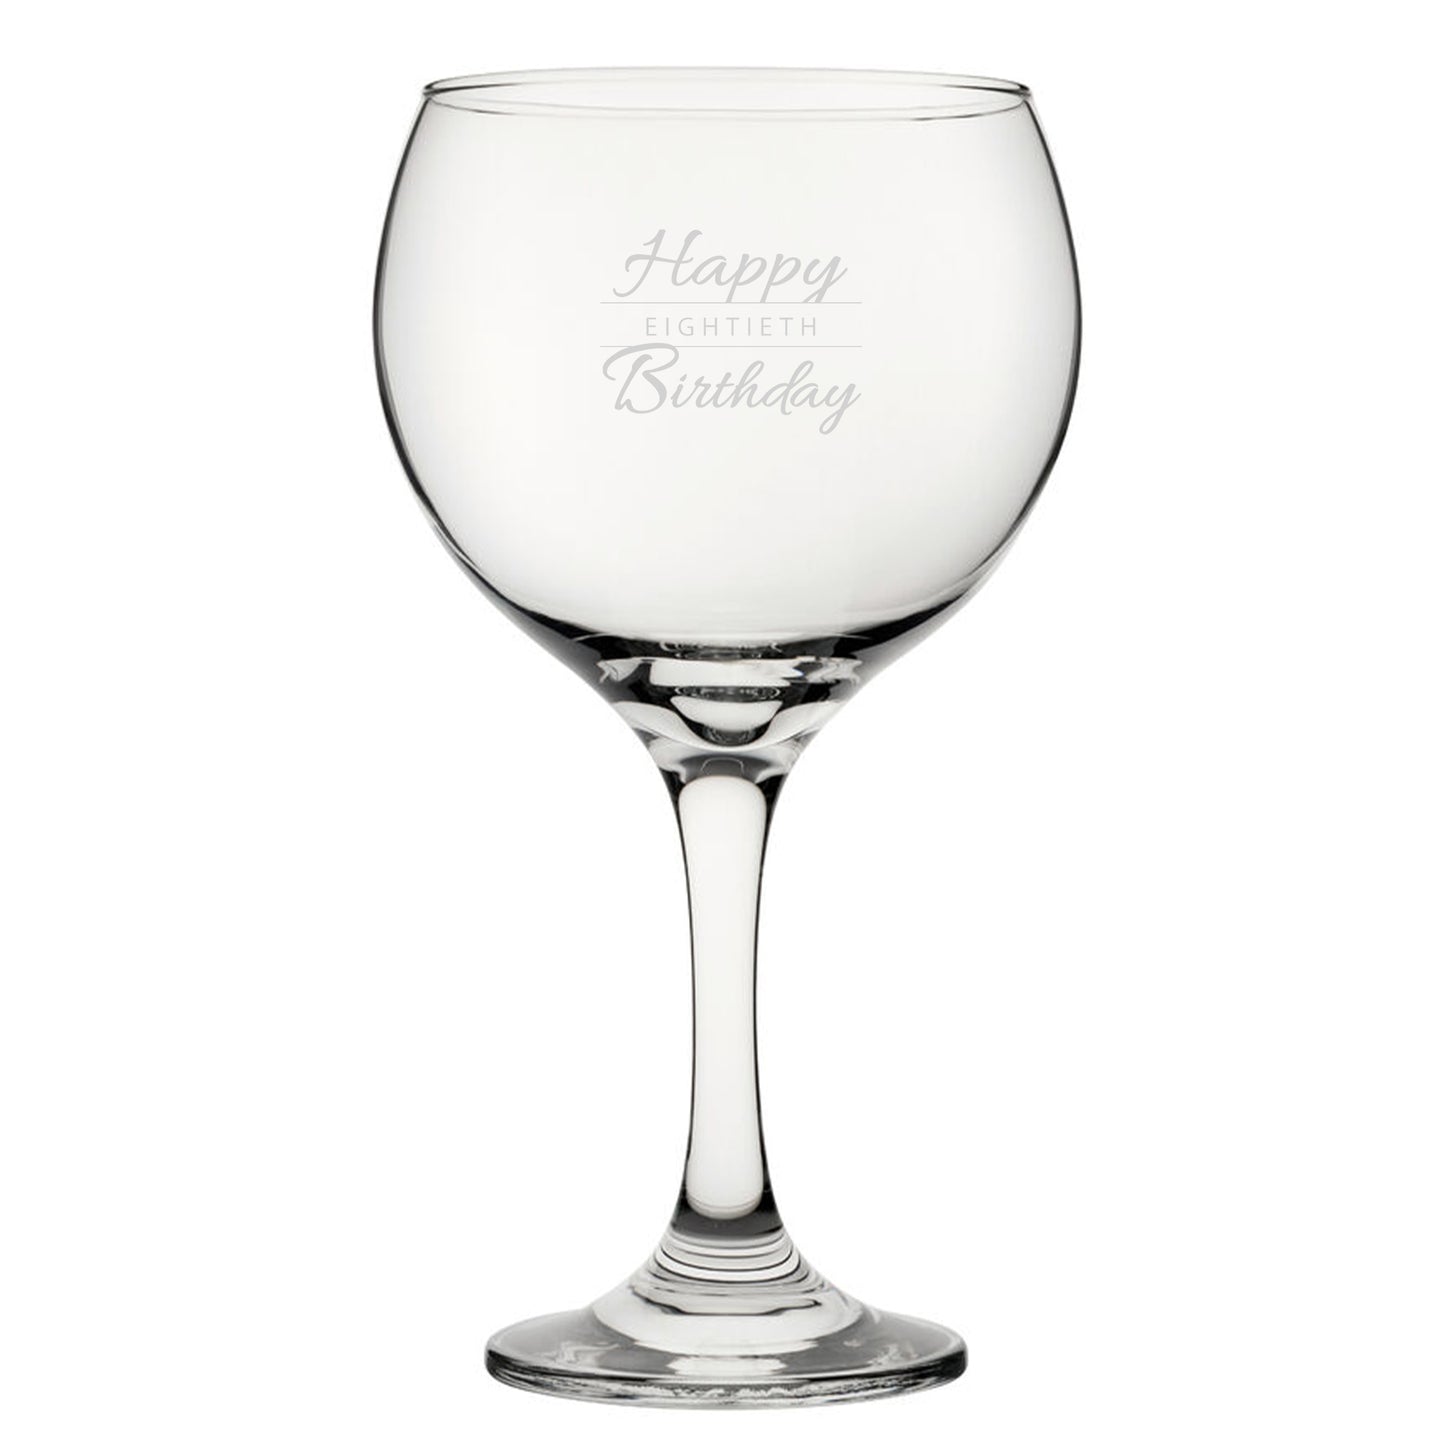 Happy 80th Birthday Modern Design - Engraved Novelty Gin Balloon Cocktail Glass Image 2